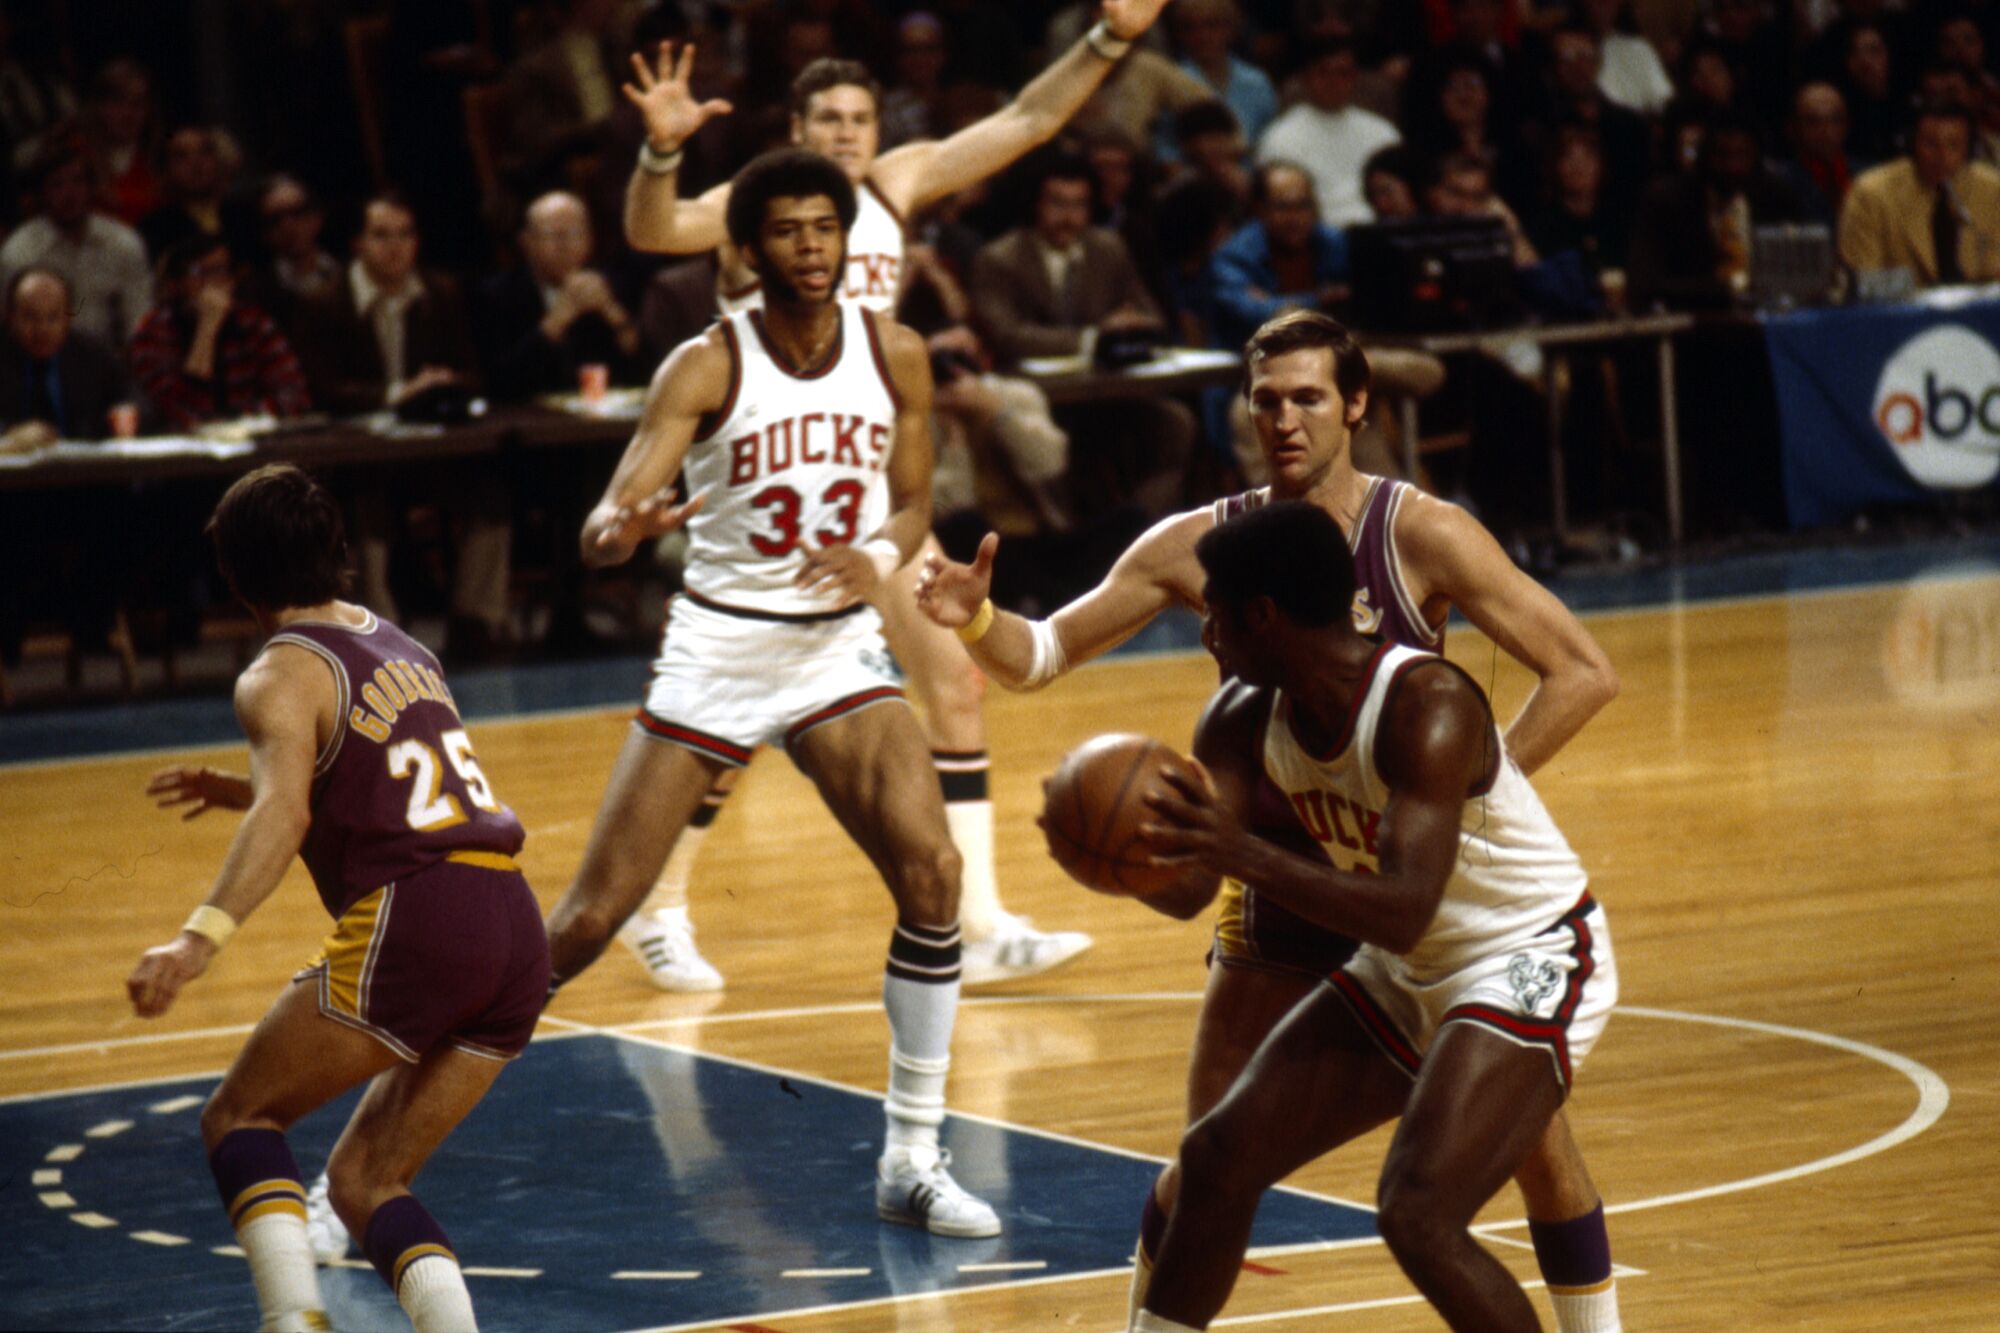 Bucks center Kareem Abdul-Jabbar looks to receive a pass from teammate Oscar Robertson, who is guarded by Jerry West.